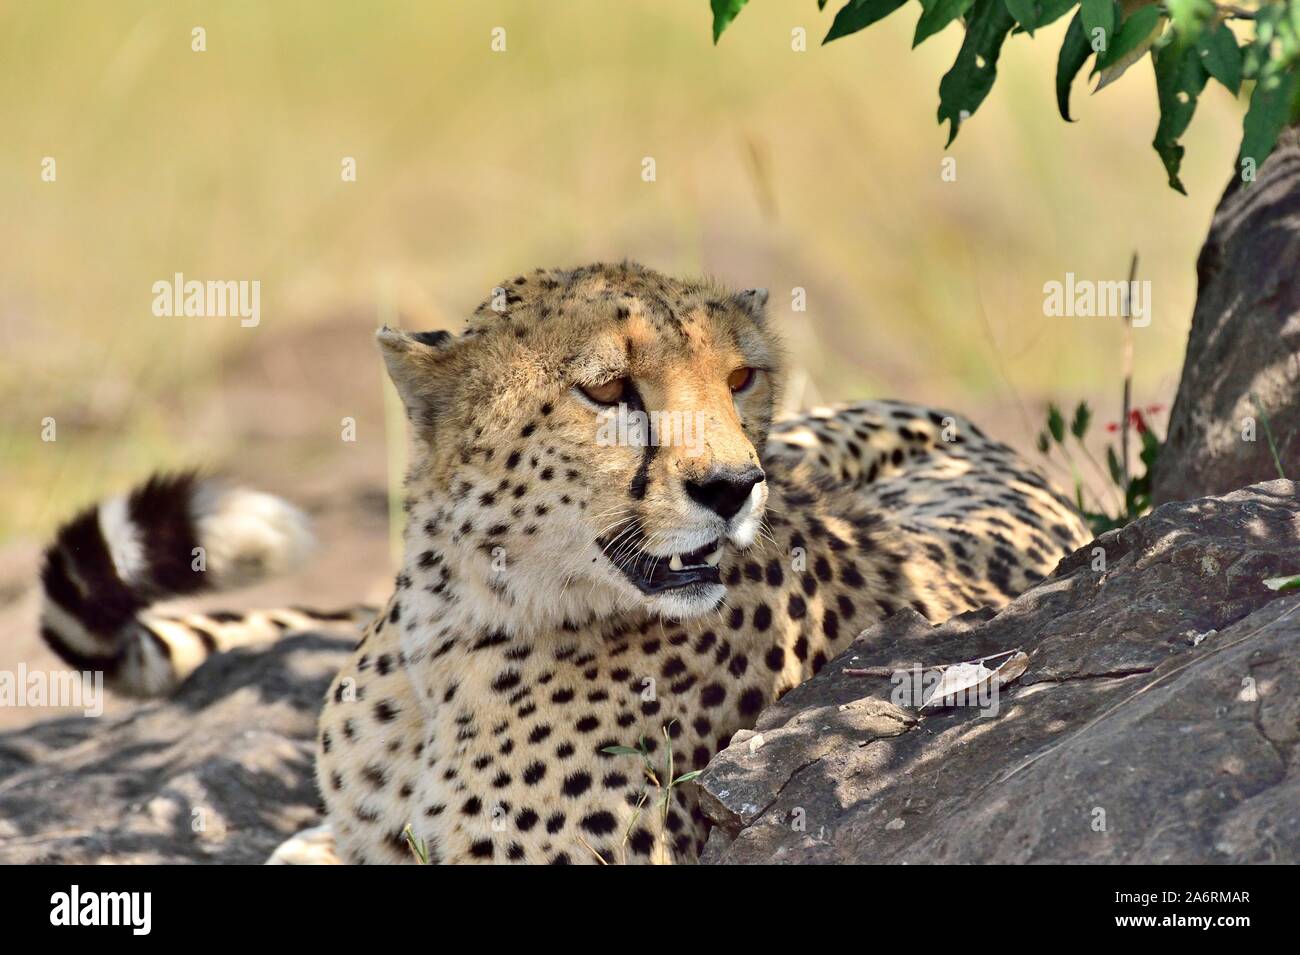 A cheetah naps in the shade of a tree Stock Photo